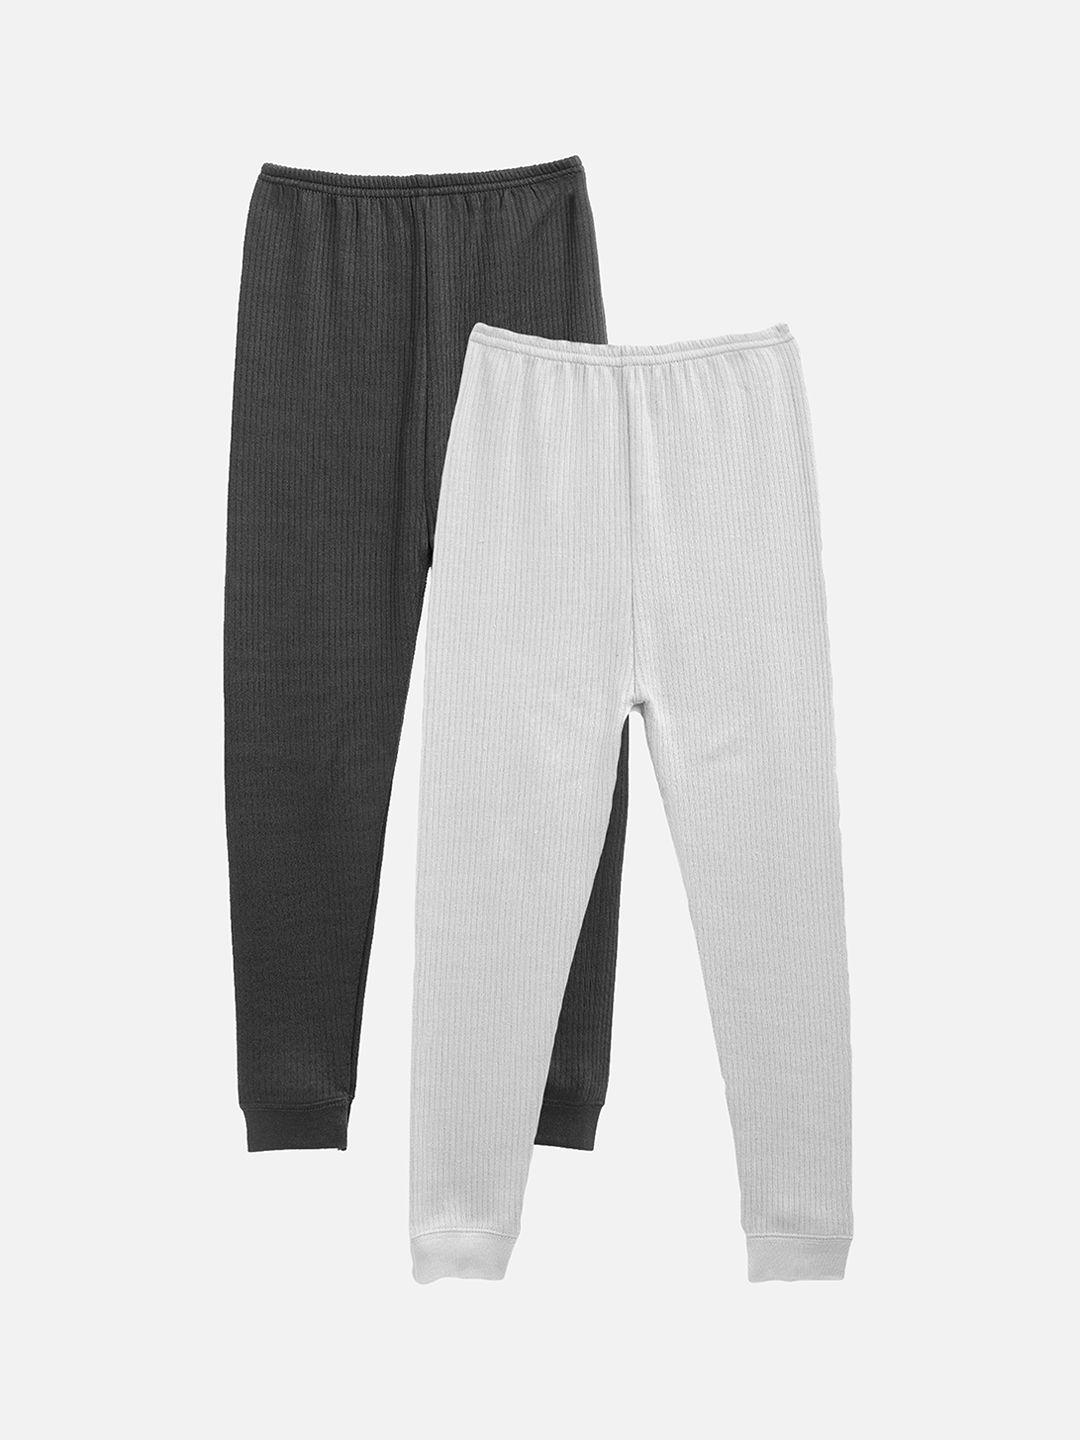 Kanvin Boys Pack Of 2 Charcoal & Grey Solid Thermal Bottoms